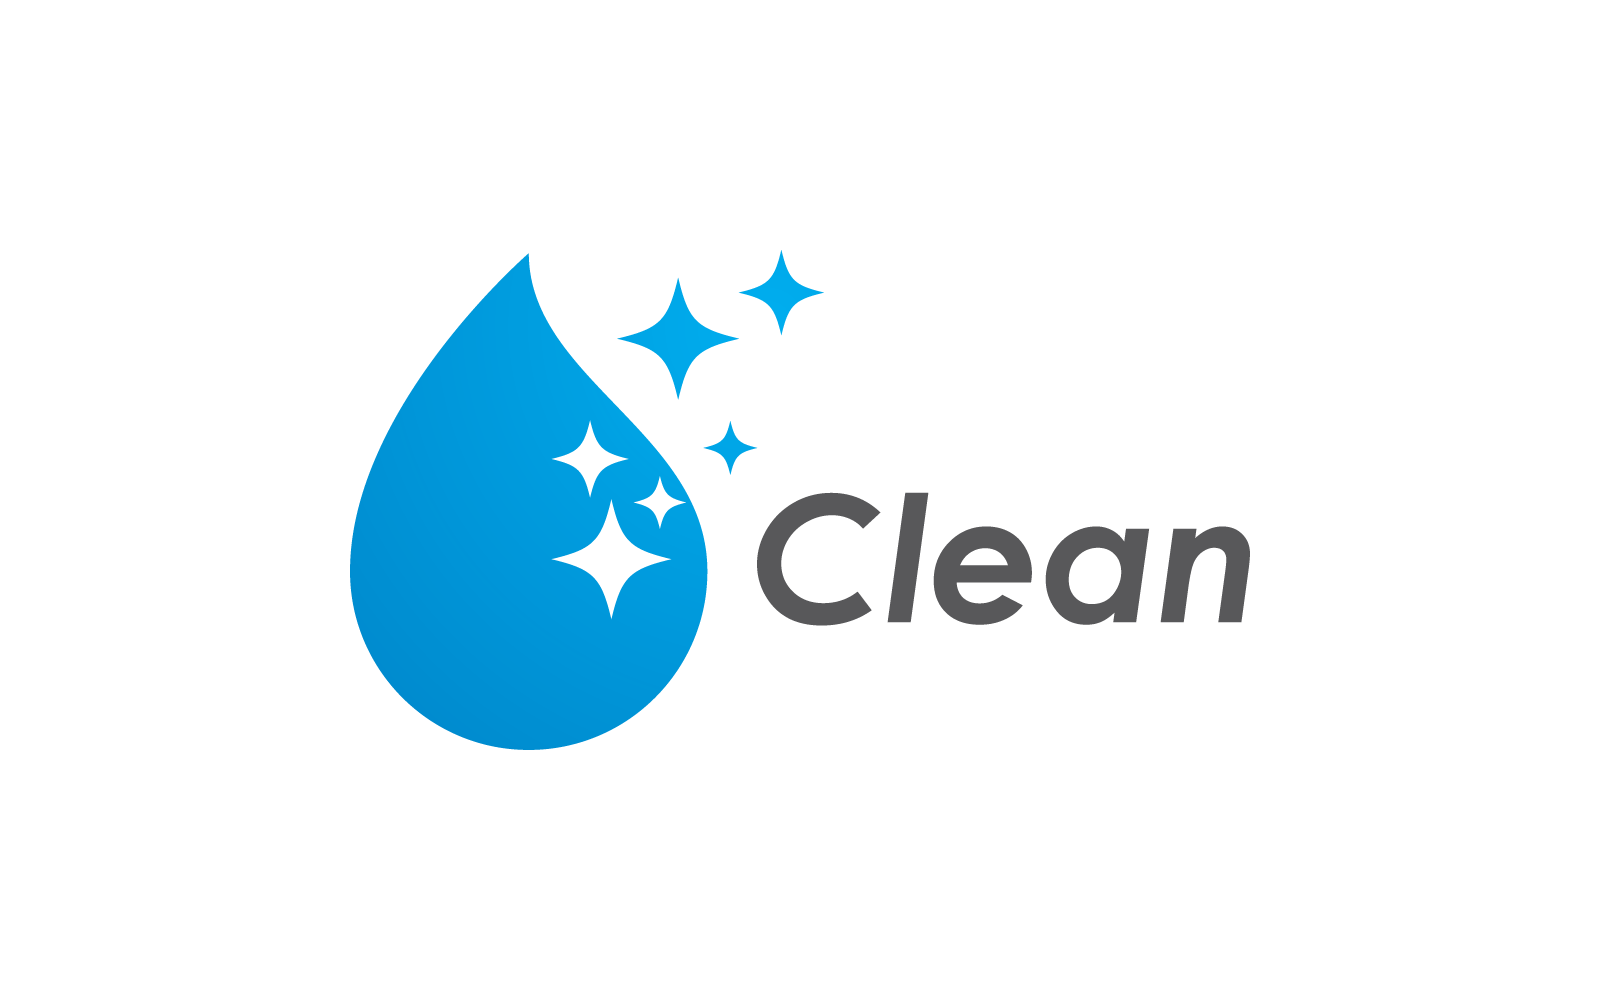 Cleaning logo and symbol vector design